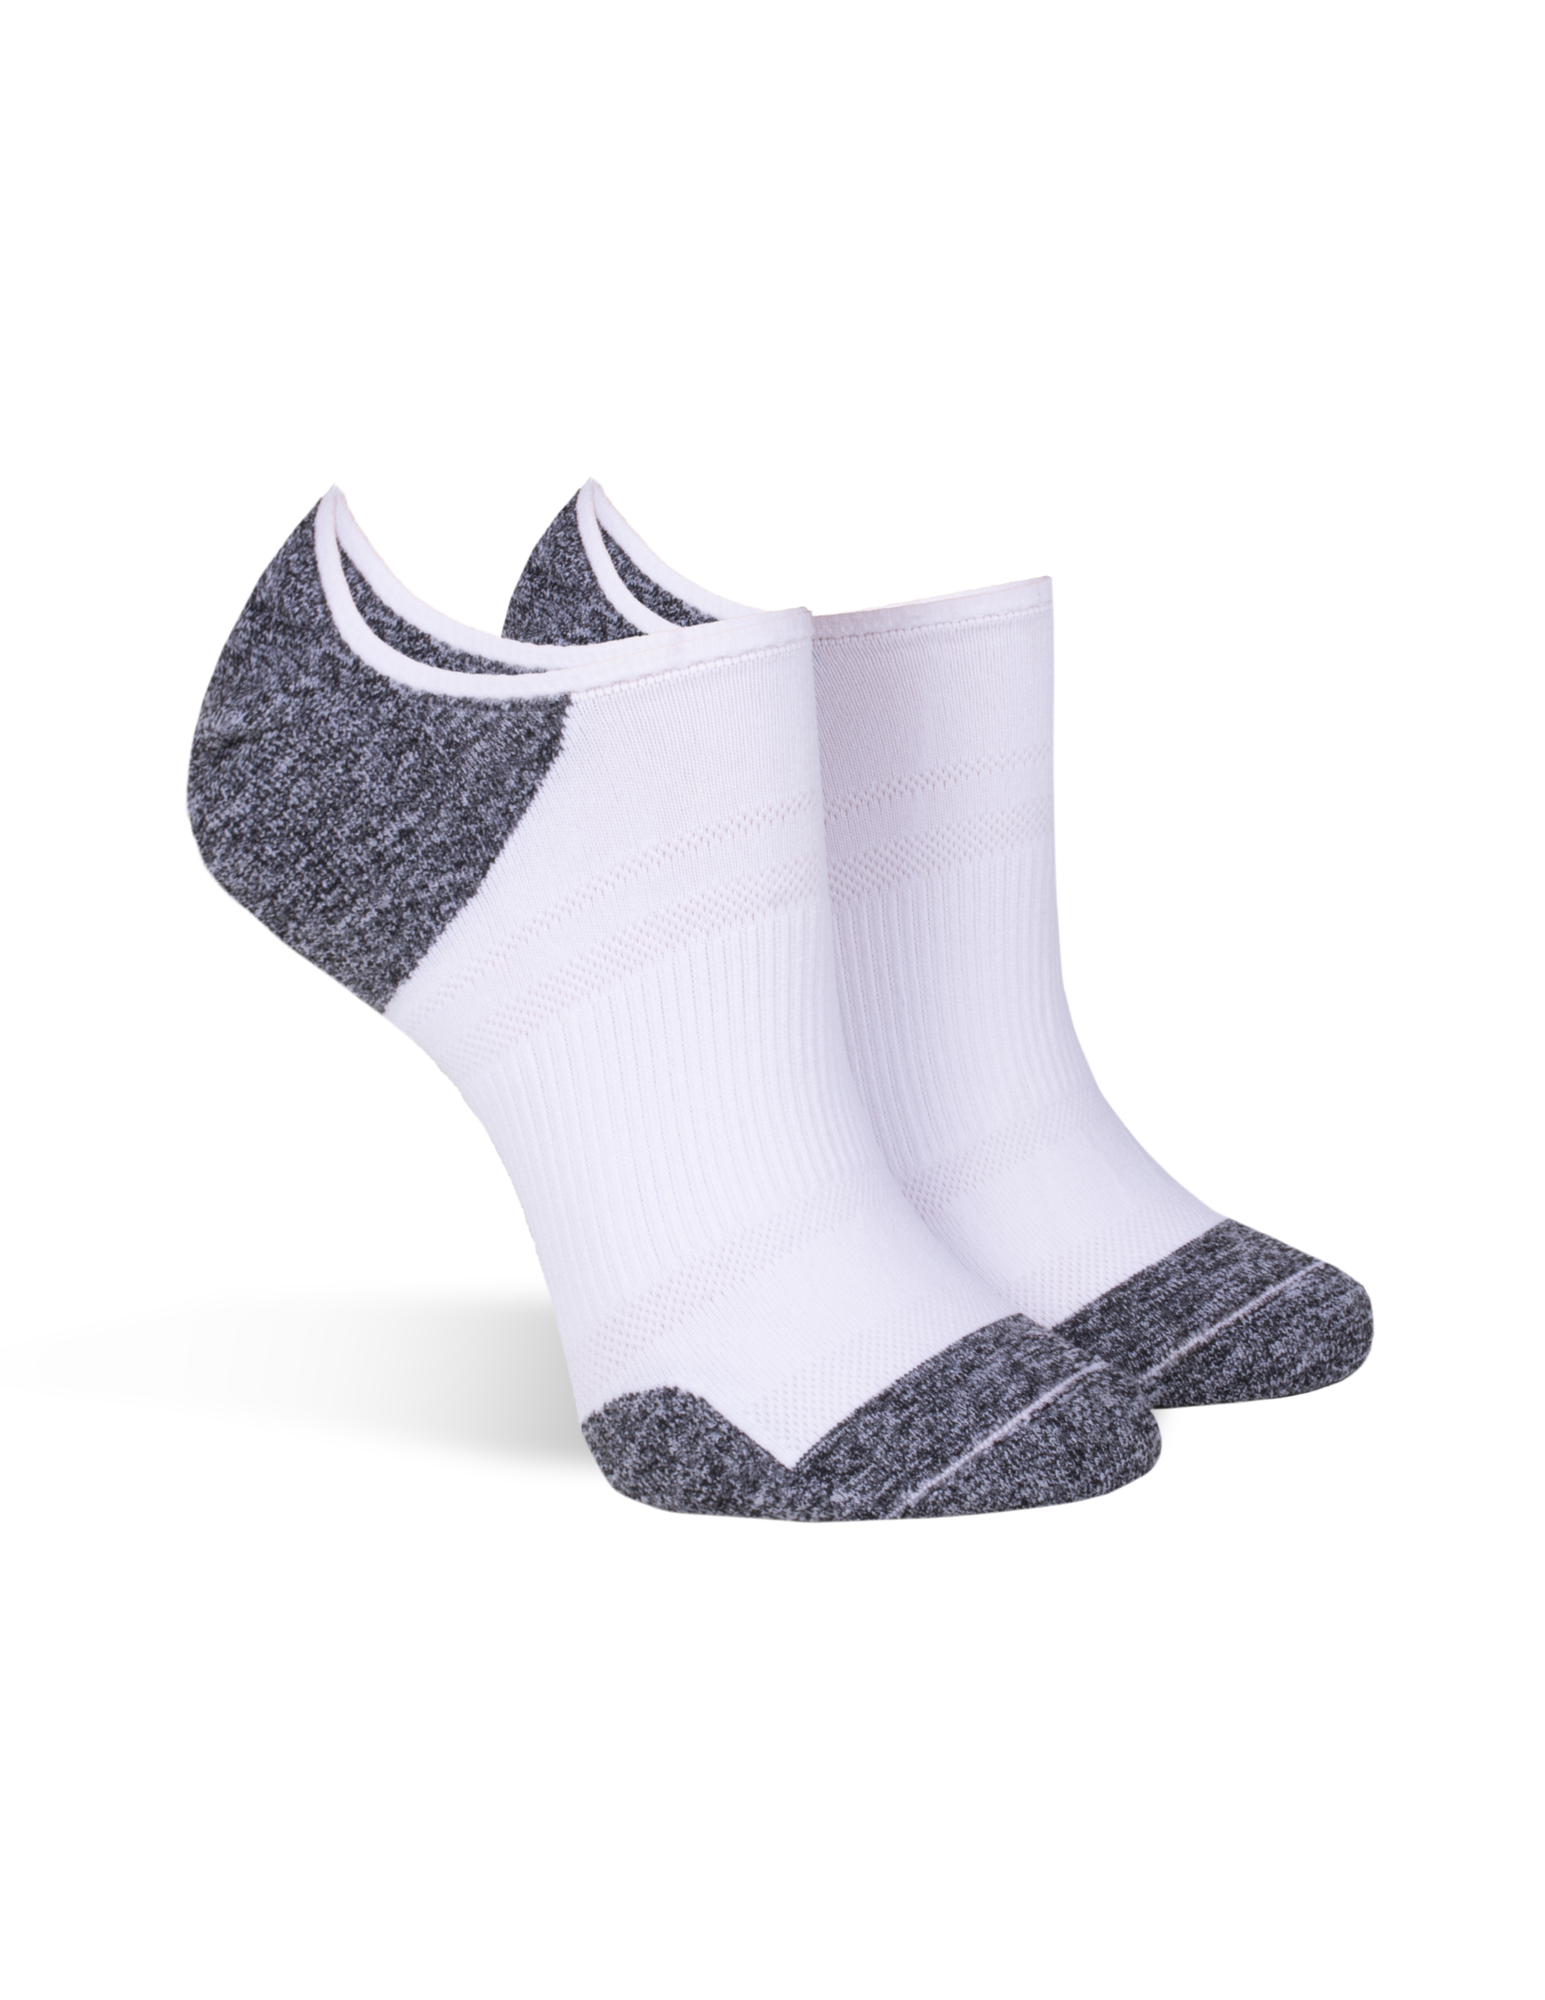 No Nonsense Women's Soft and Breathable Cushioned No-Show Socks - 3 pk -  White, 4-10 - Fred Meyer